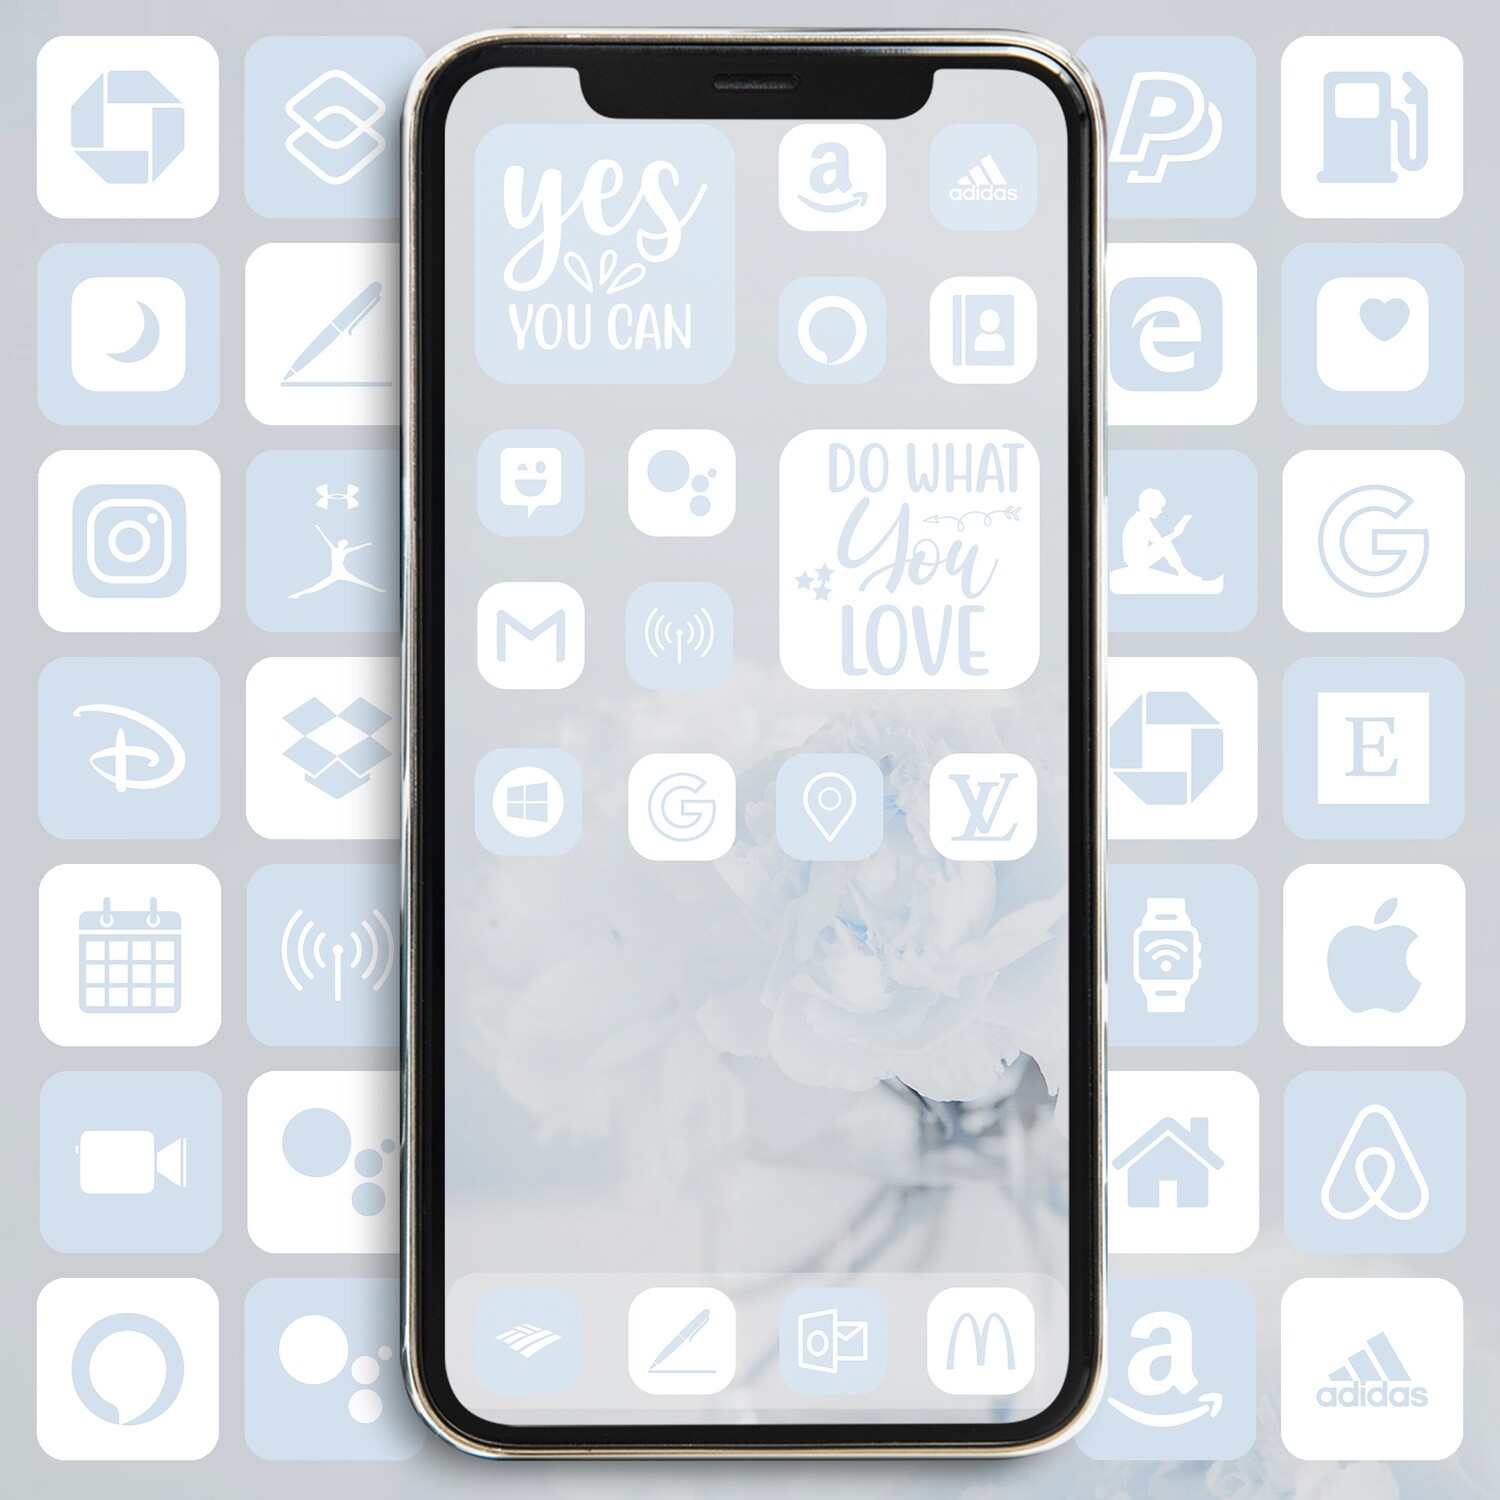 Alice Blue Color Aesthetic app icons ios 15